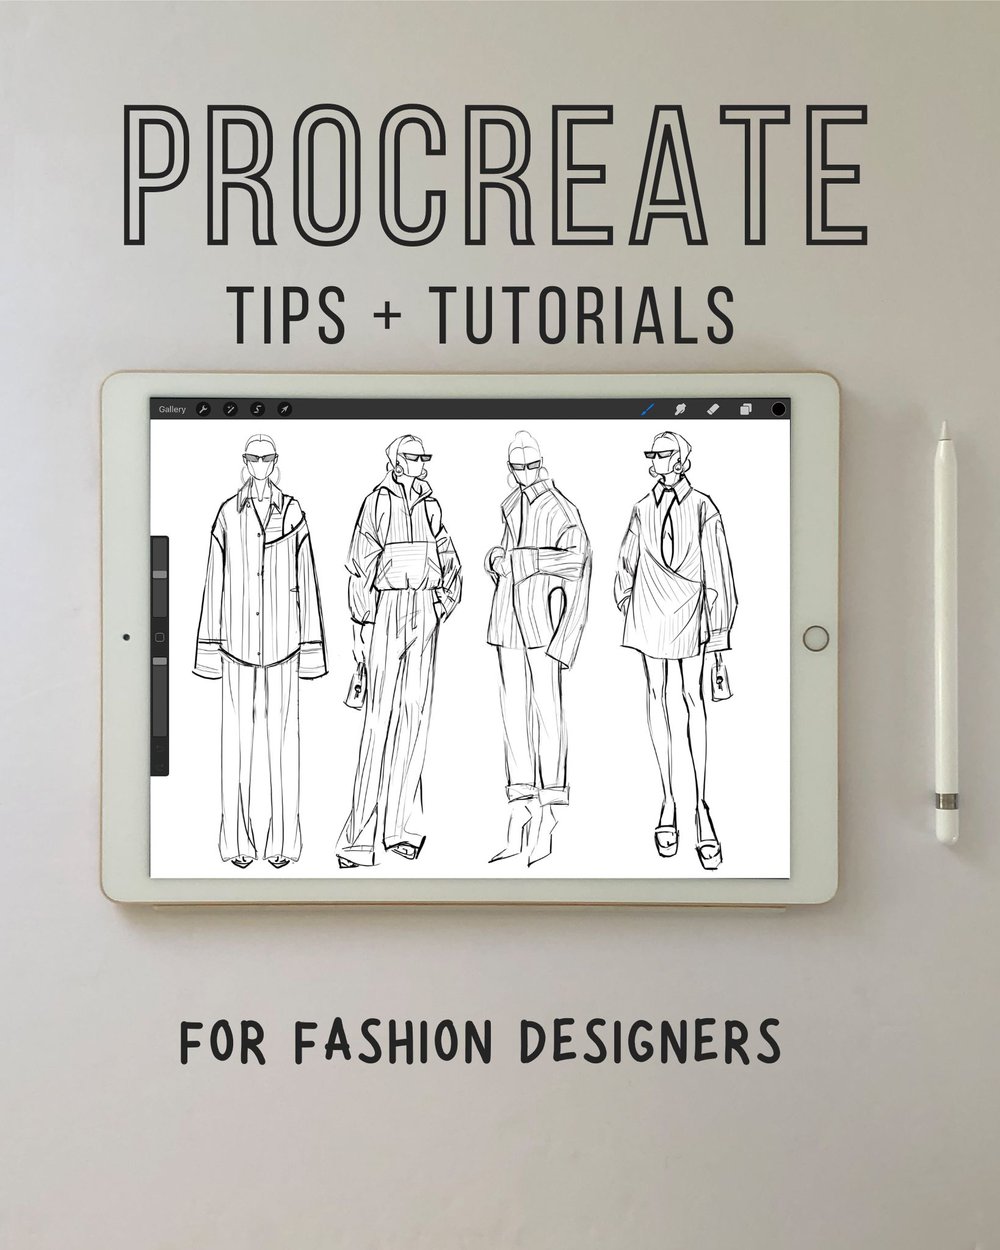 Procreate: Tips and Tutorials for Fashion Designers (Beginner Friendly)